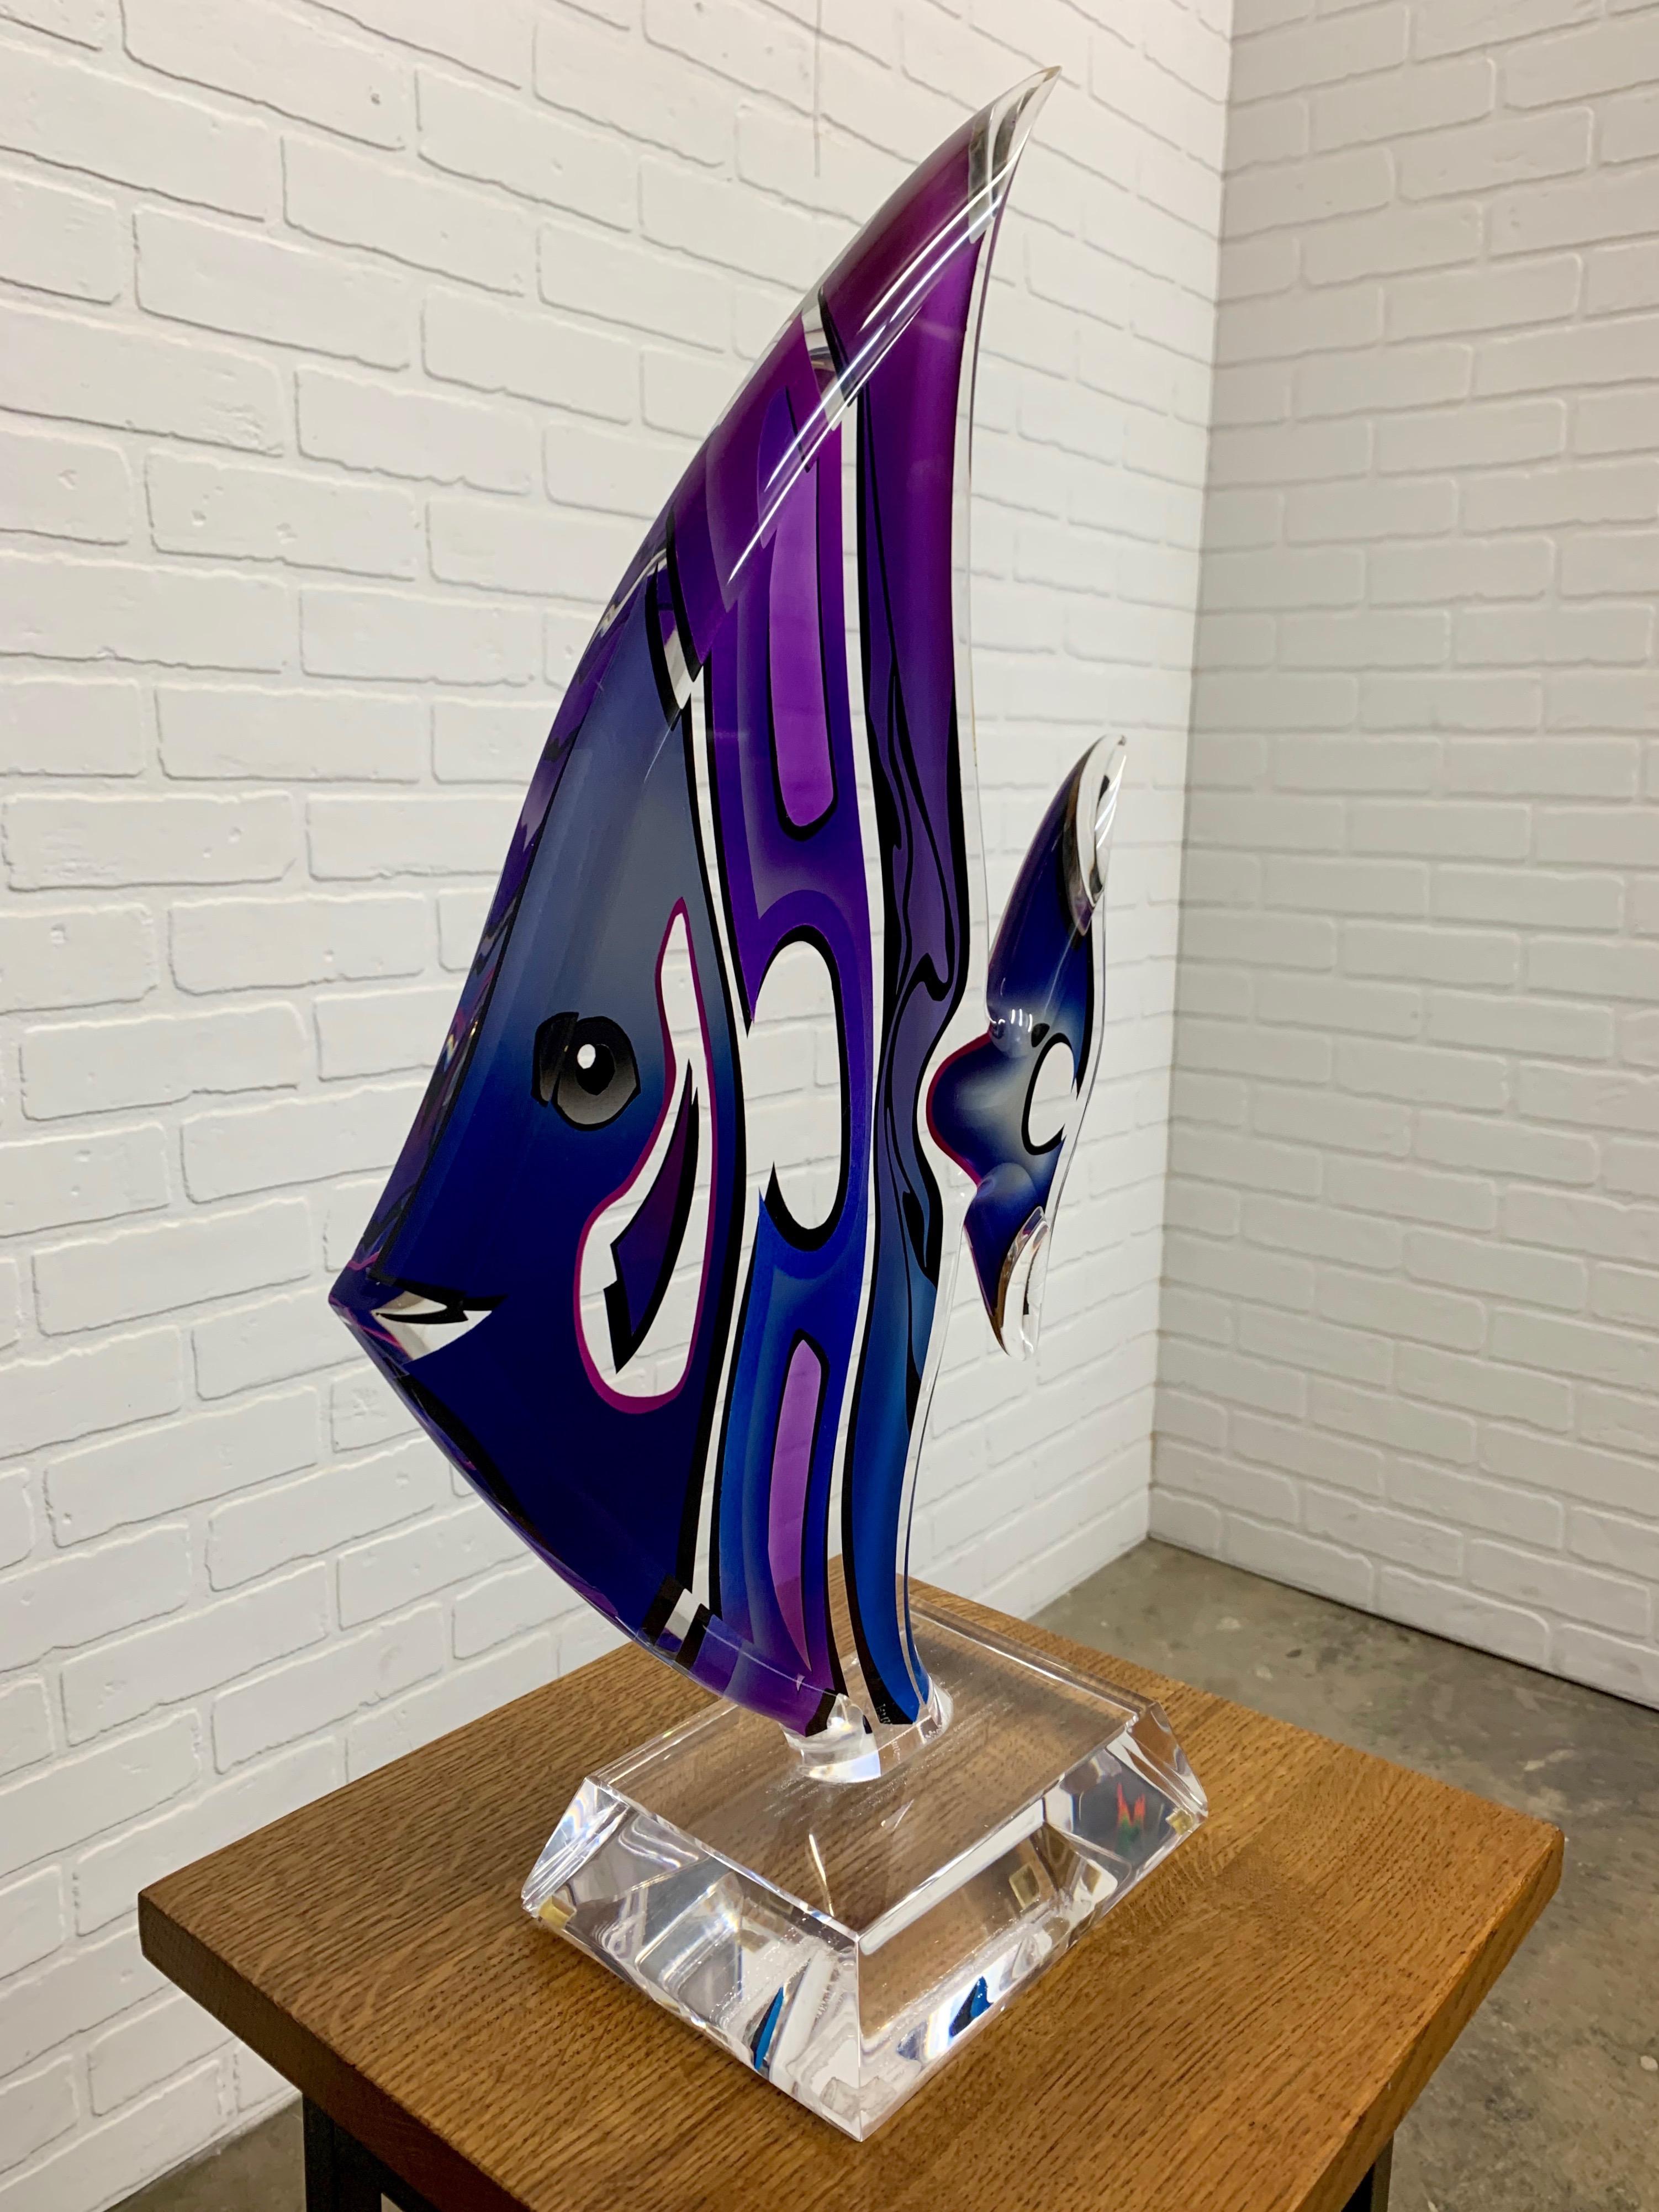 Laminated layers of multicolored Lucite for this outstanding angel fish sculpture.